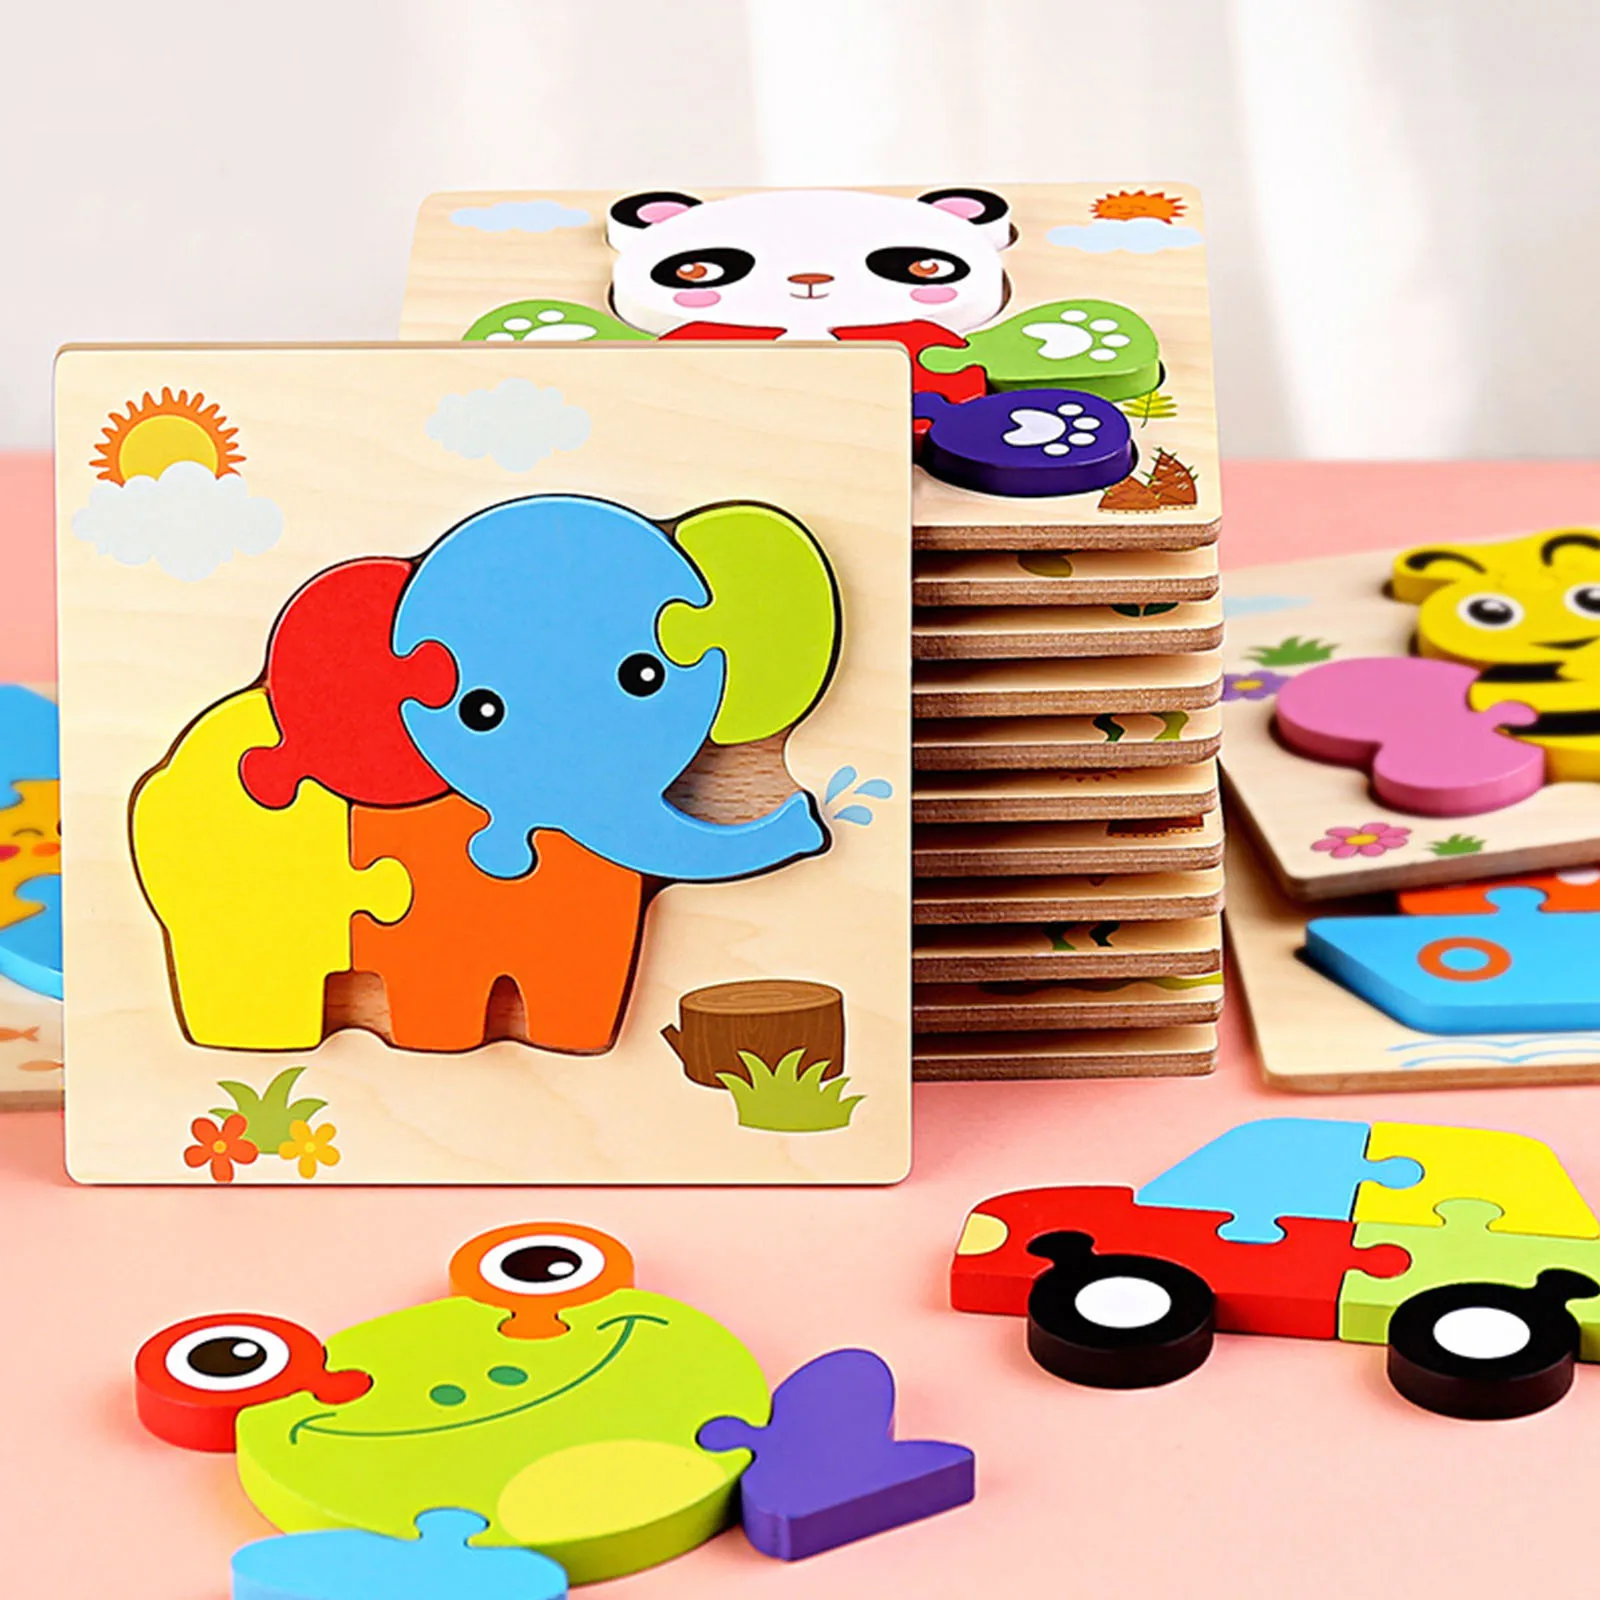 

NEW Baby Toys Wooden 3D Puzzle Tangram Shapes Learning Cartoon Animal Intelligence Jigsaw Puzzle Toys For Children Educational